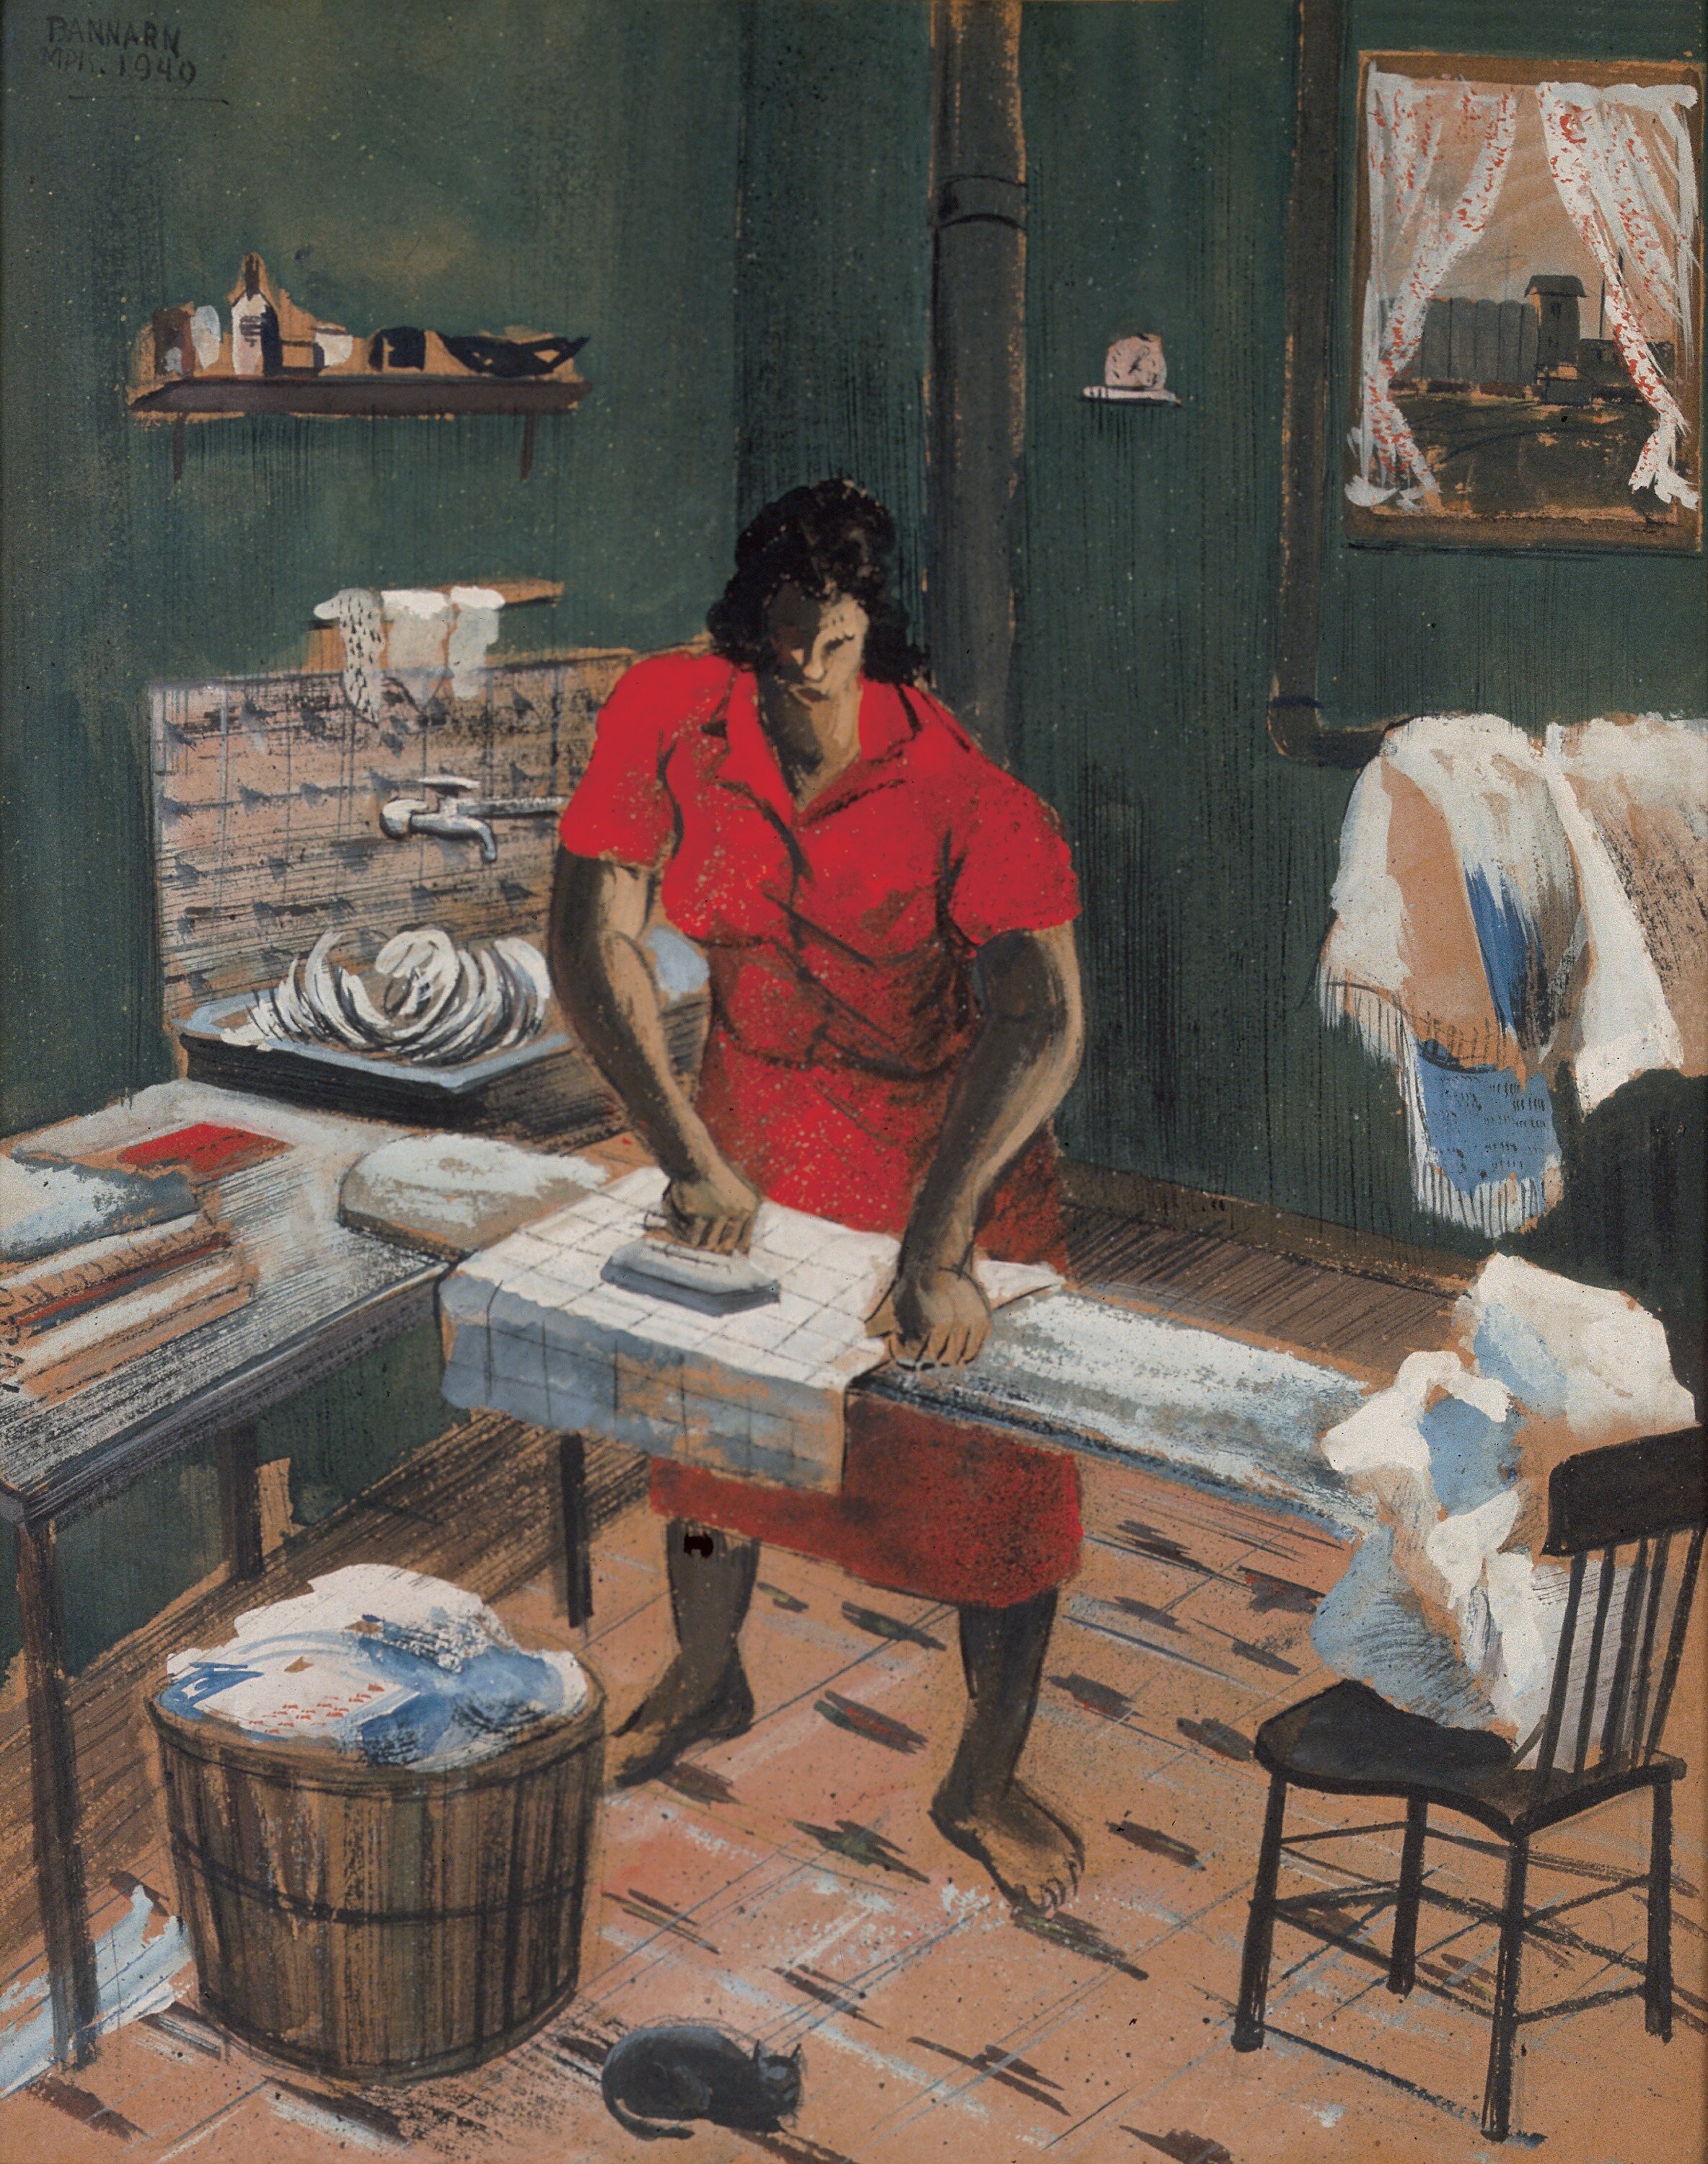 Henry Wilmer Bannarn, American, 1910 – 1965. Ironing Day, 1949. Gouache on board, 20 × 16 in. 